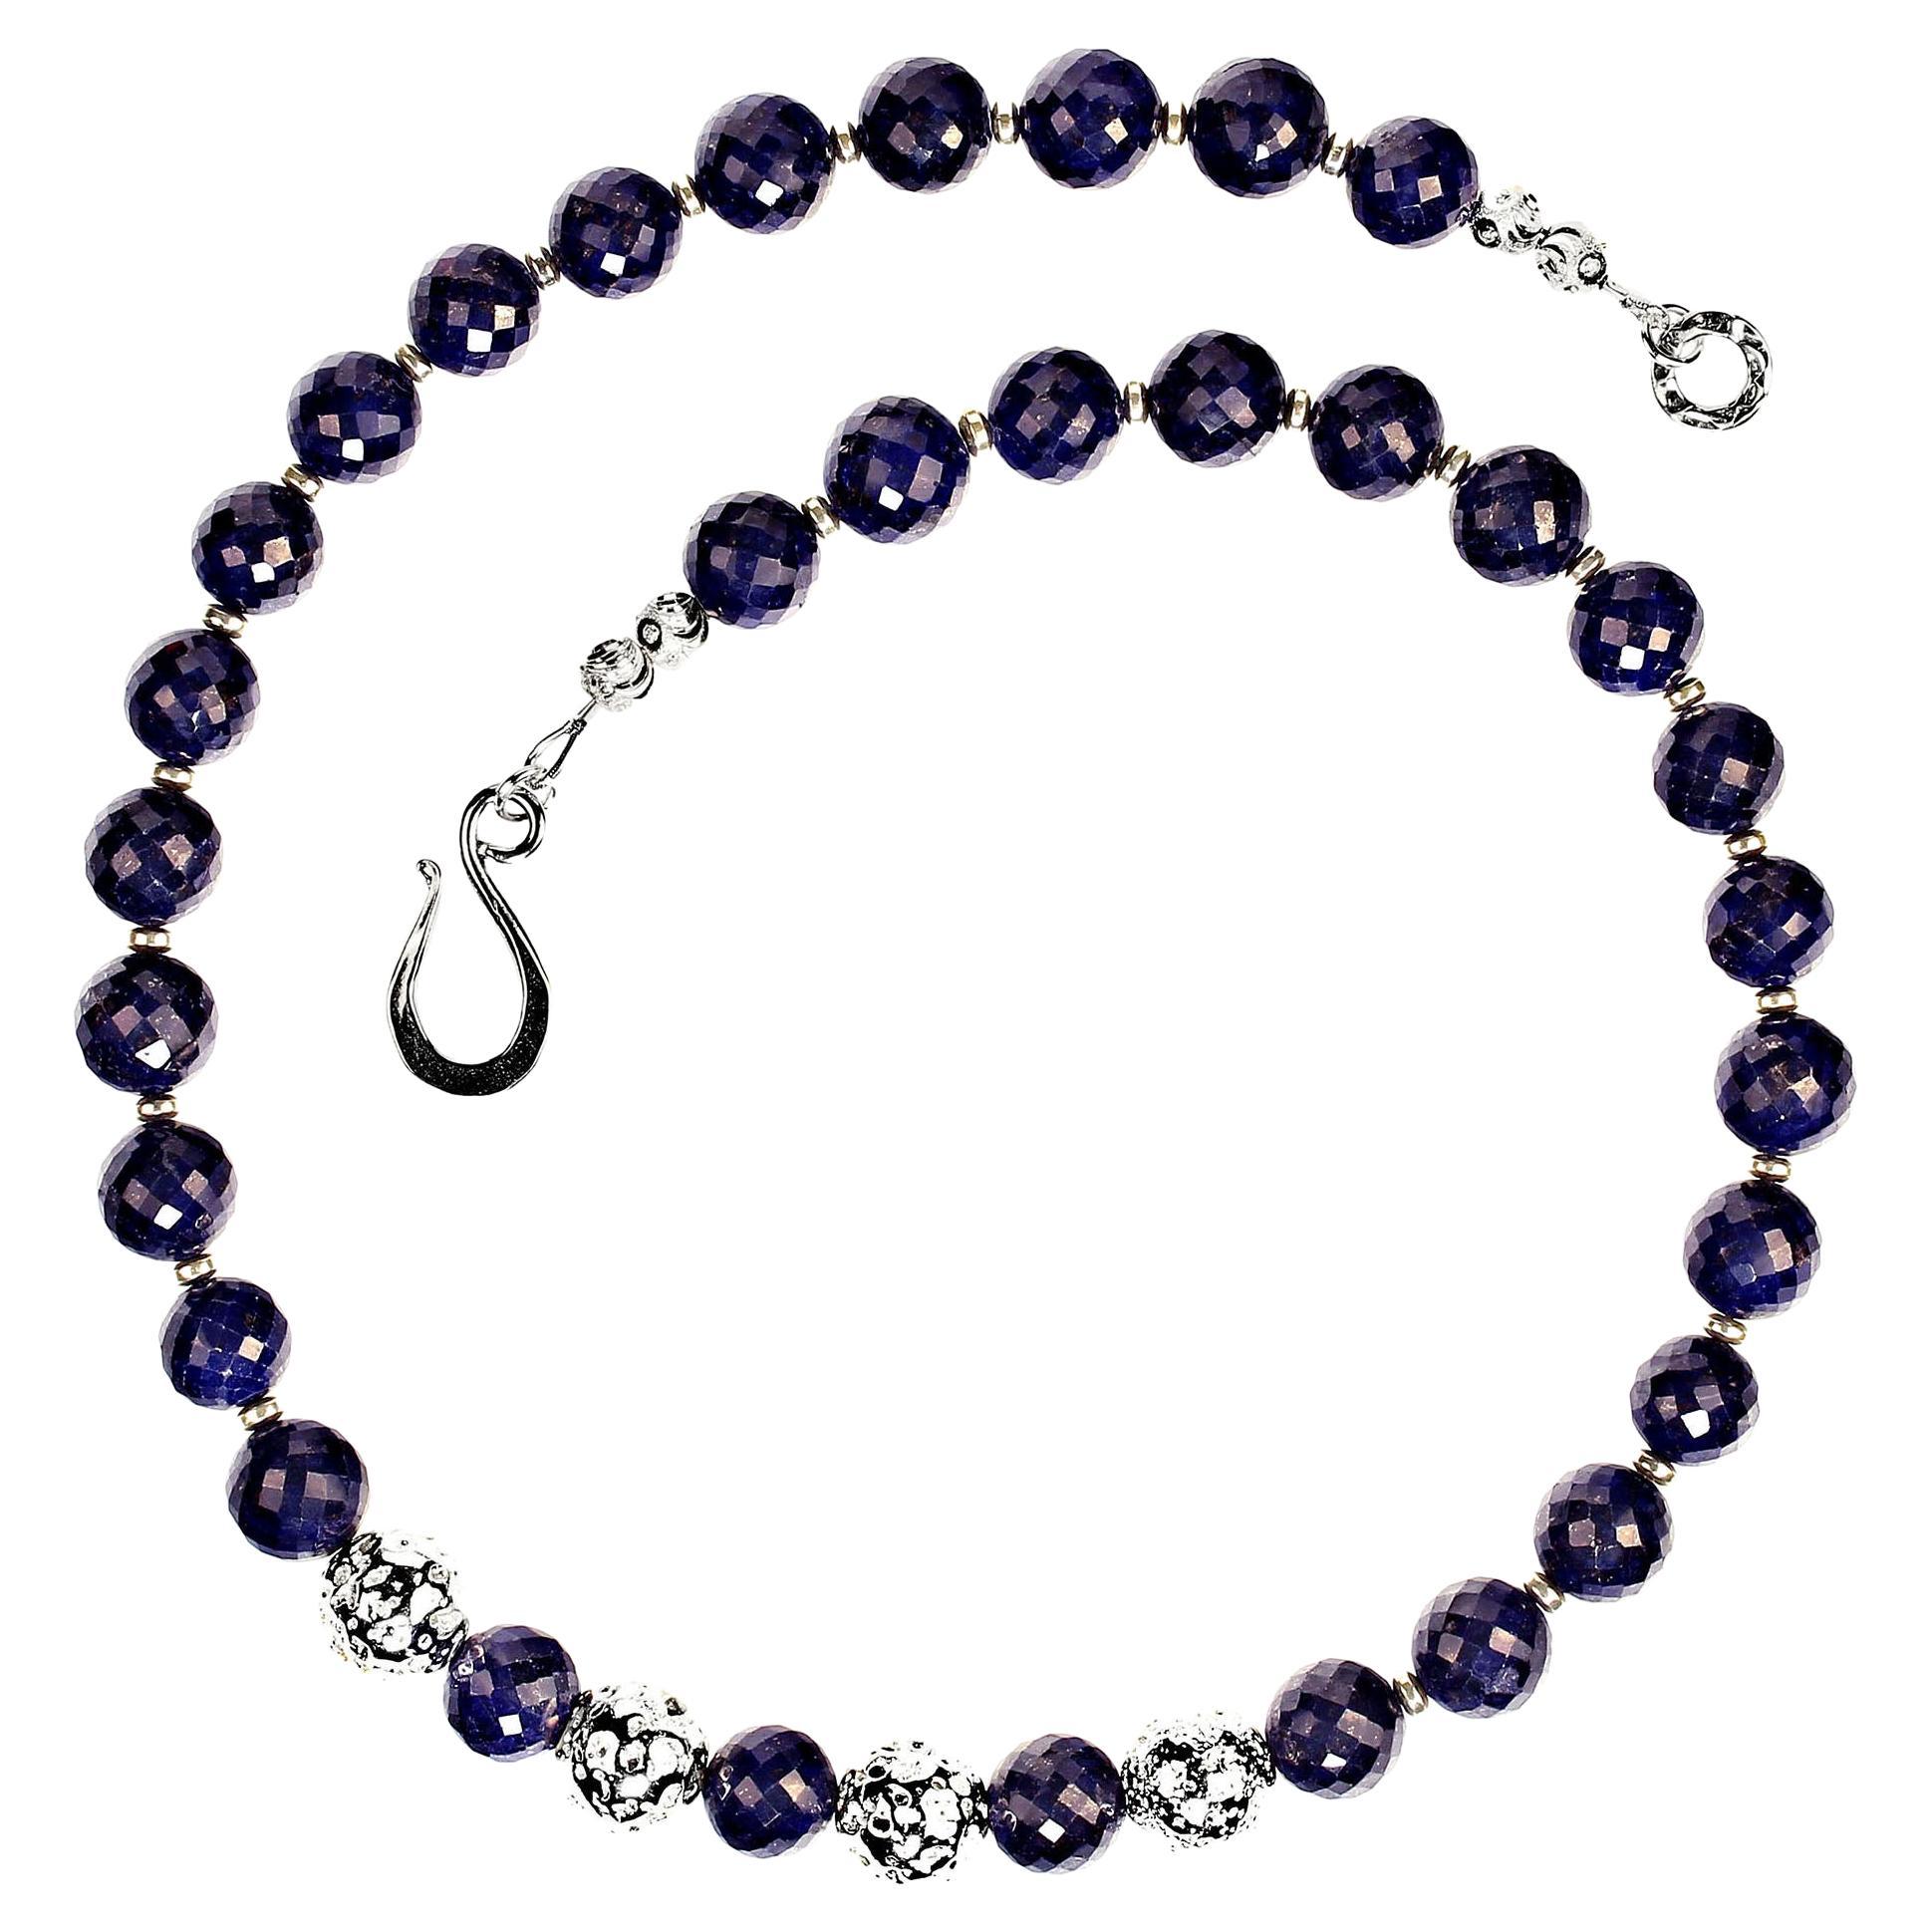 Bead AJD Stunning 21 Inch Blue Sapphire necklace with Silver accents For Sale